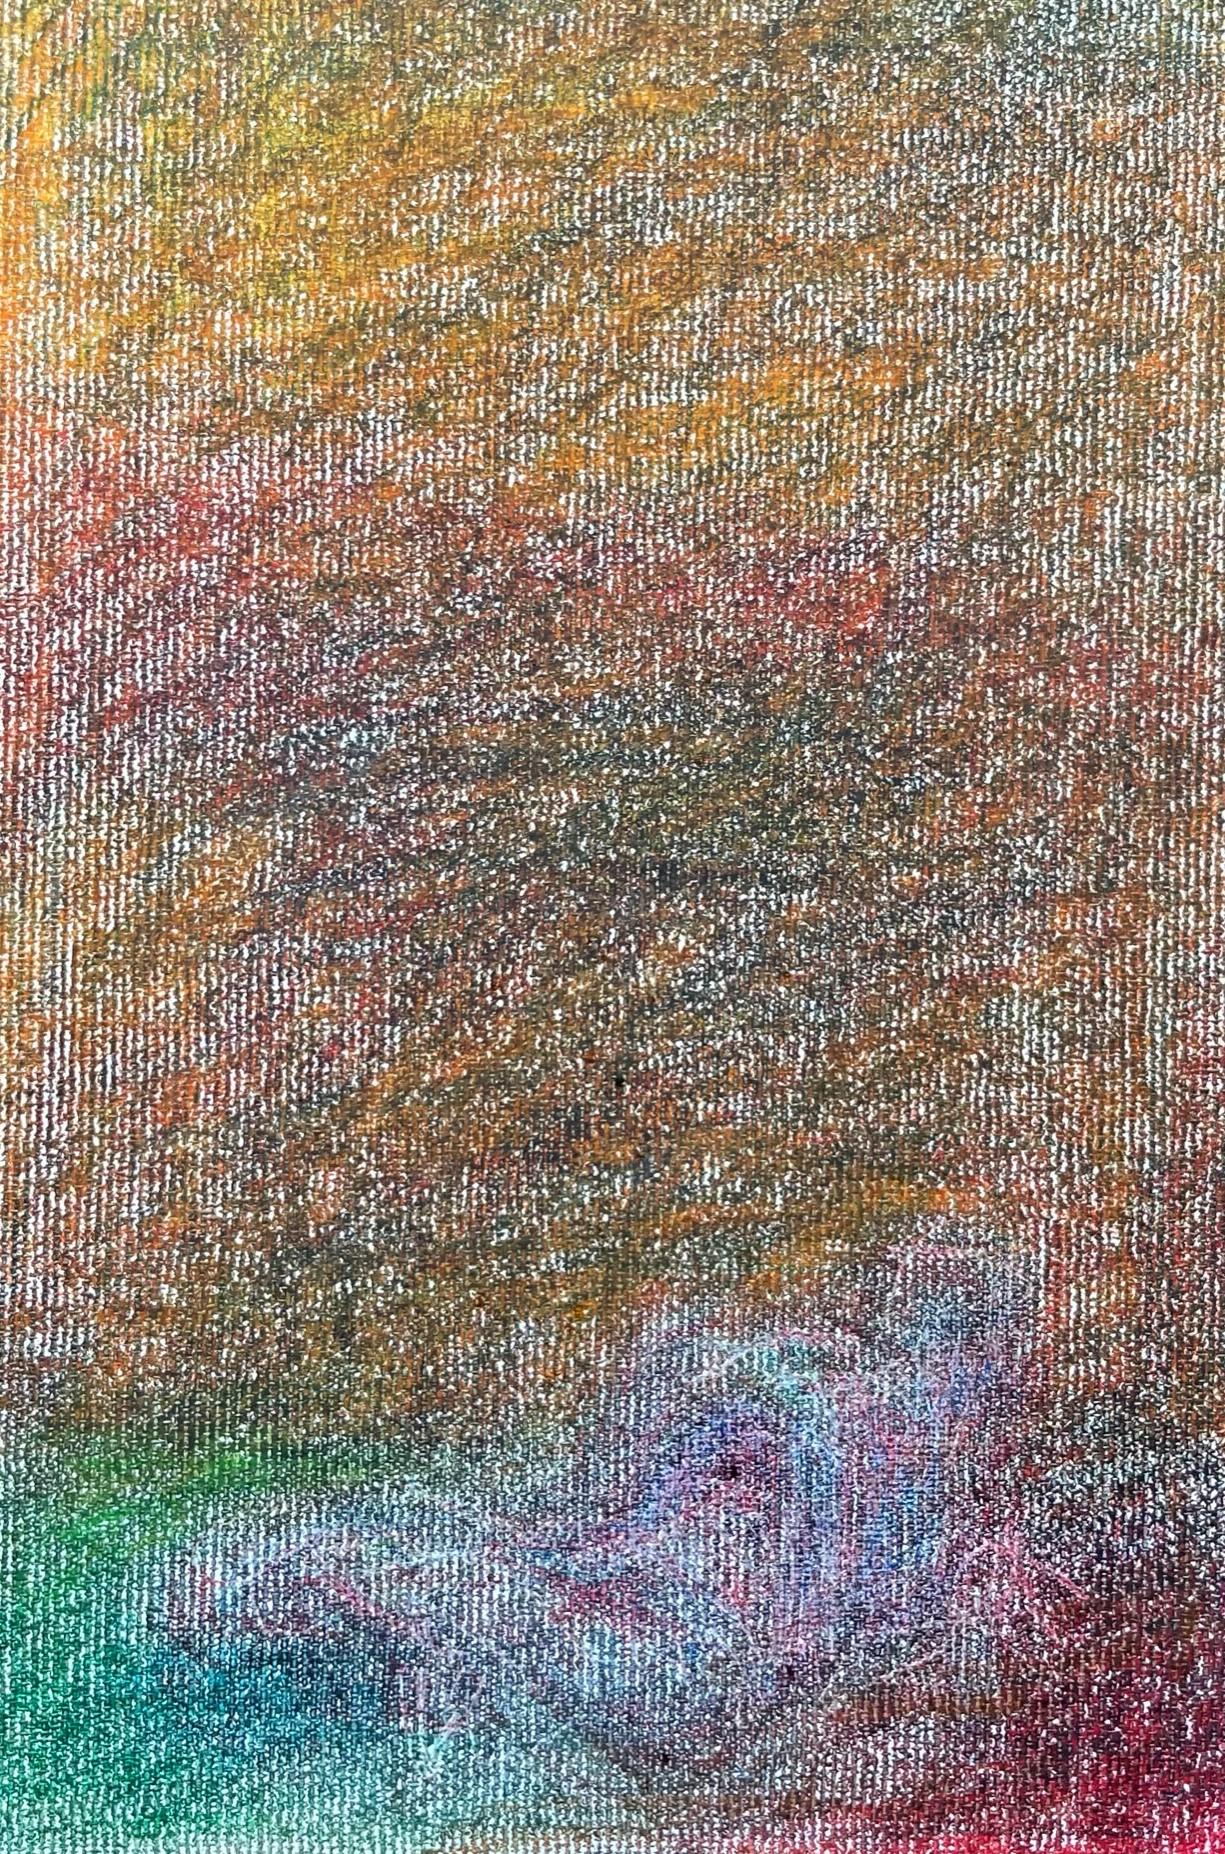 Body in the Field #12, 2022
coloured pencils on canvas

25 H x 16 W cm

Signed on reverse

Zsolt Berszán embodies in his works the dissolution of the human body through the prism of the fragment, the body in pieces, and the skeletal carcass. It is